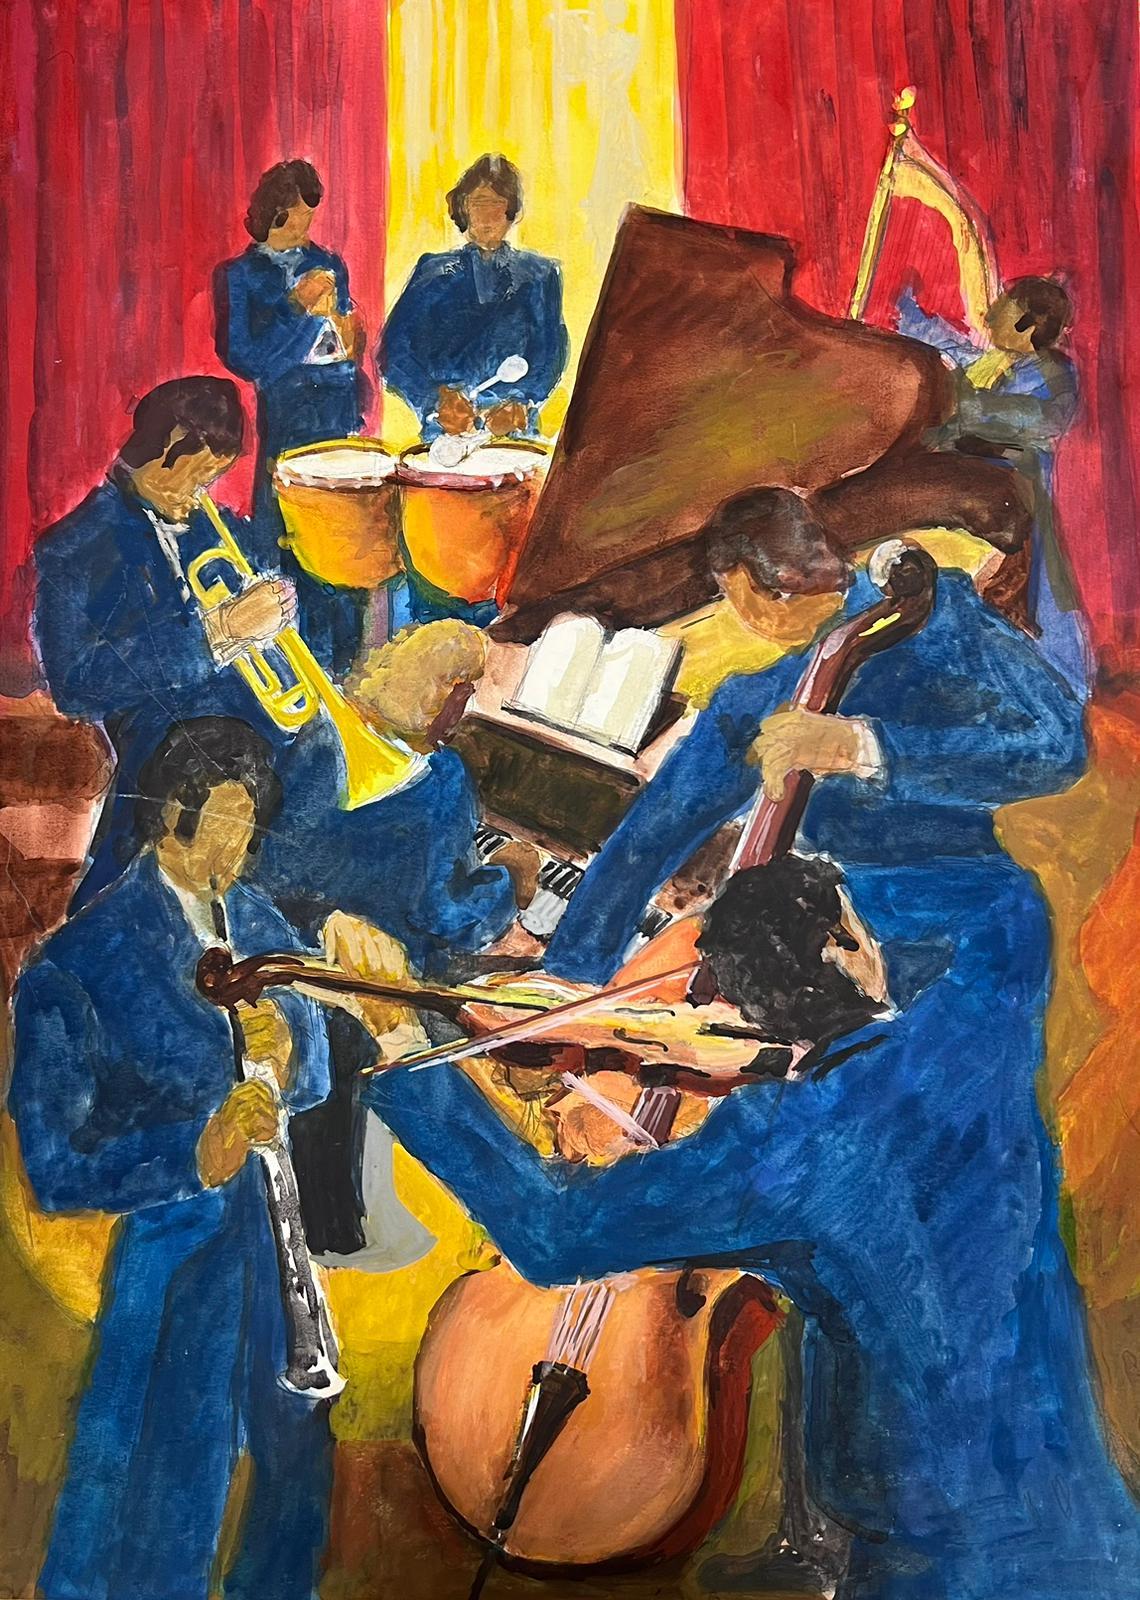 The Orchestra Jazz Band Superb 20th Century French Modernist Painting